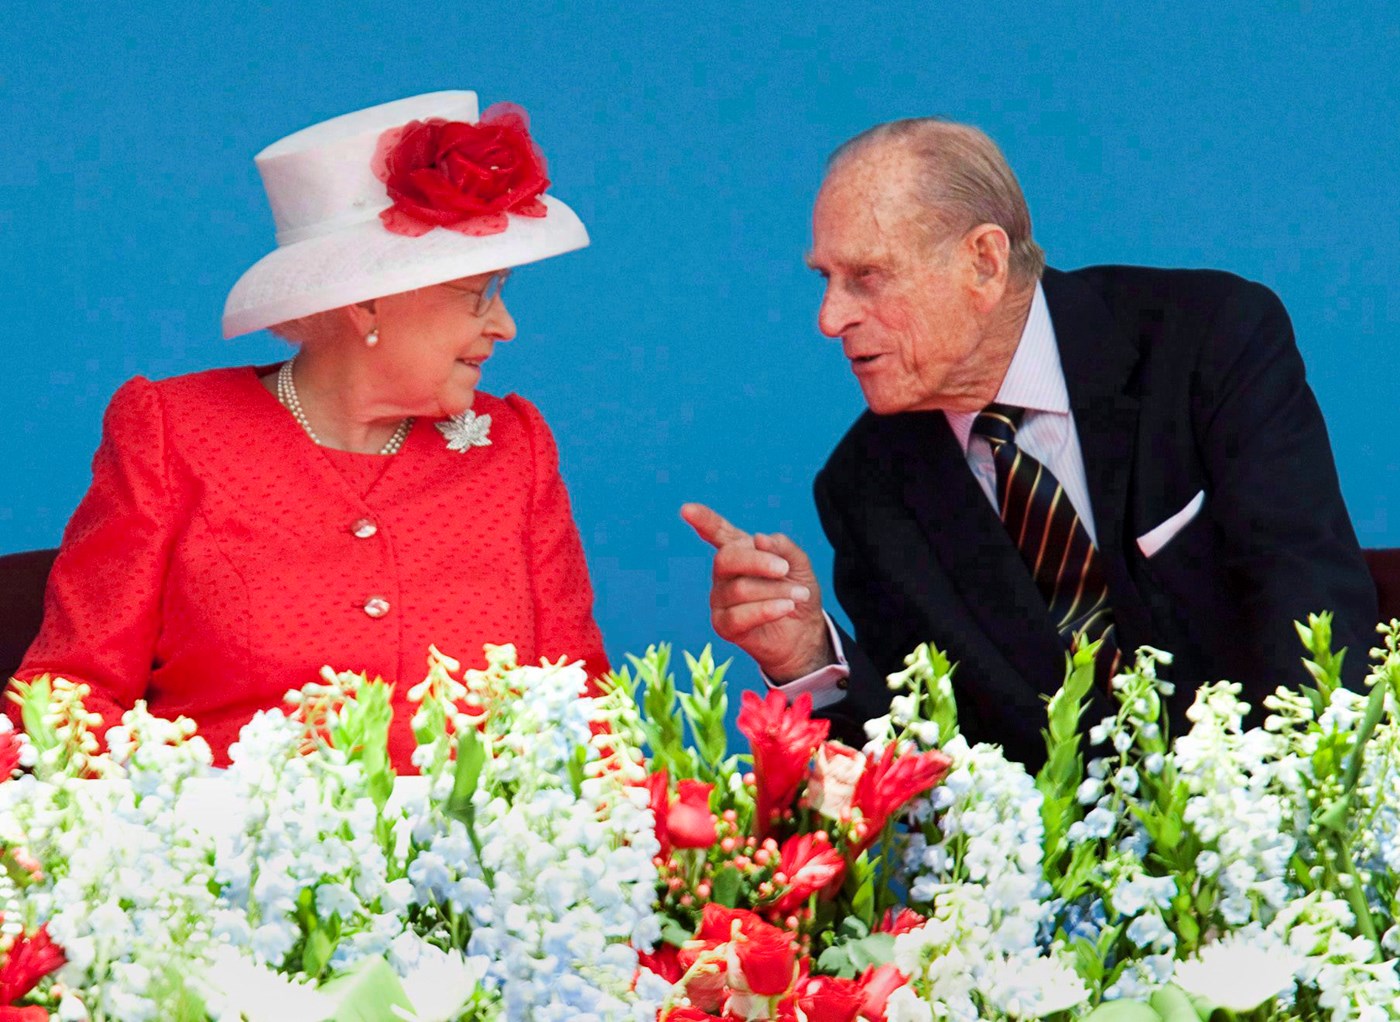 Queen Elizabeth and Prince Philip chat during Canada Day celebrations on Parliament Hill in 2010. (Photo credit: The Canadian Press)